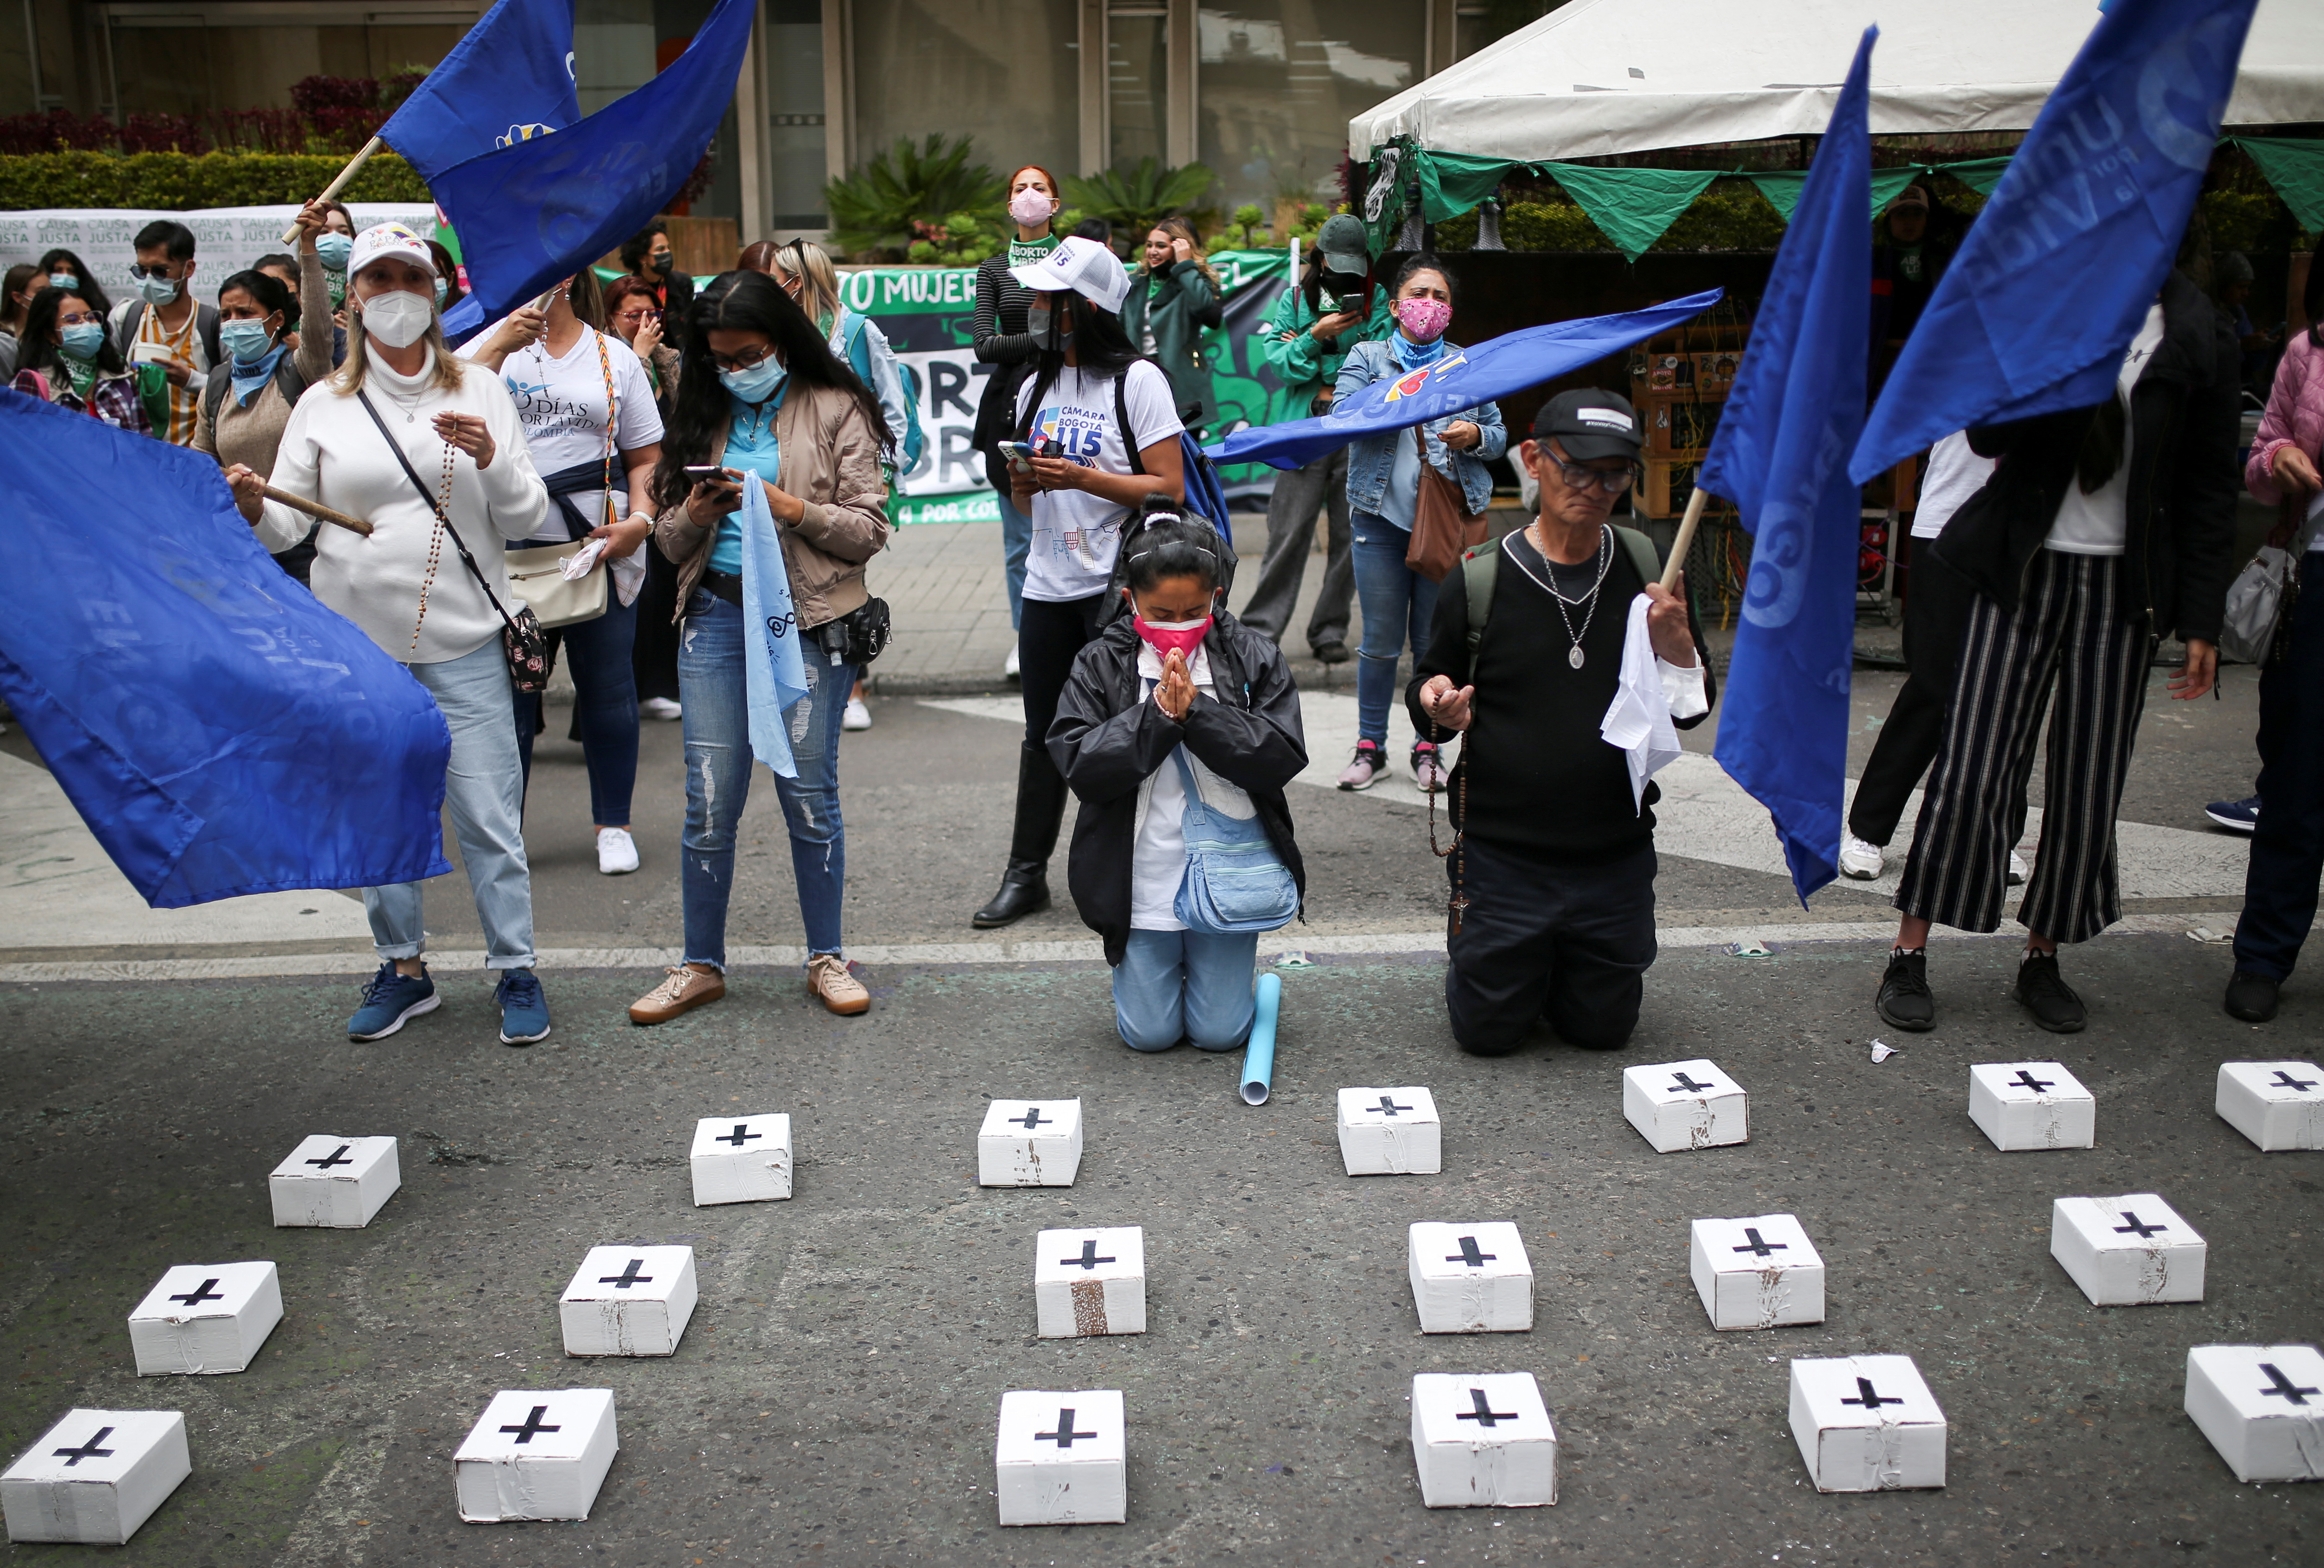 Demonstrations against and in favour of removing abortion from the penal code, in Bogota